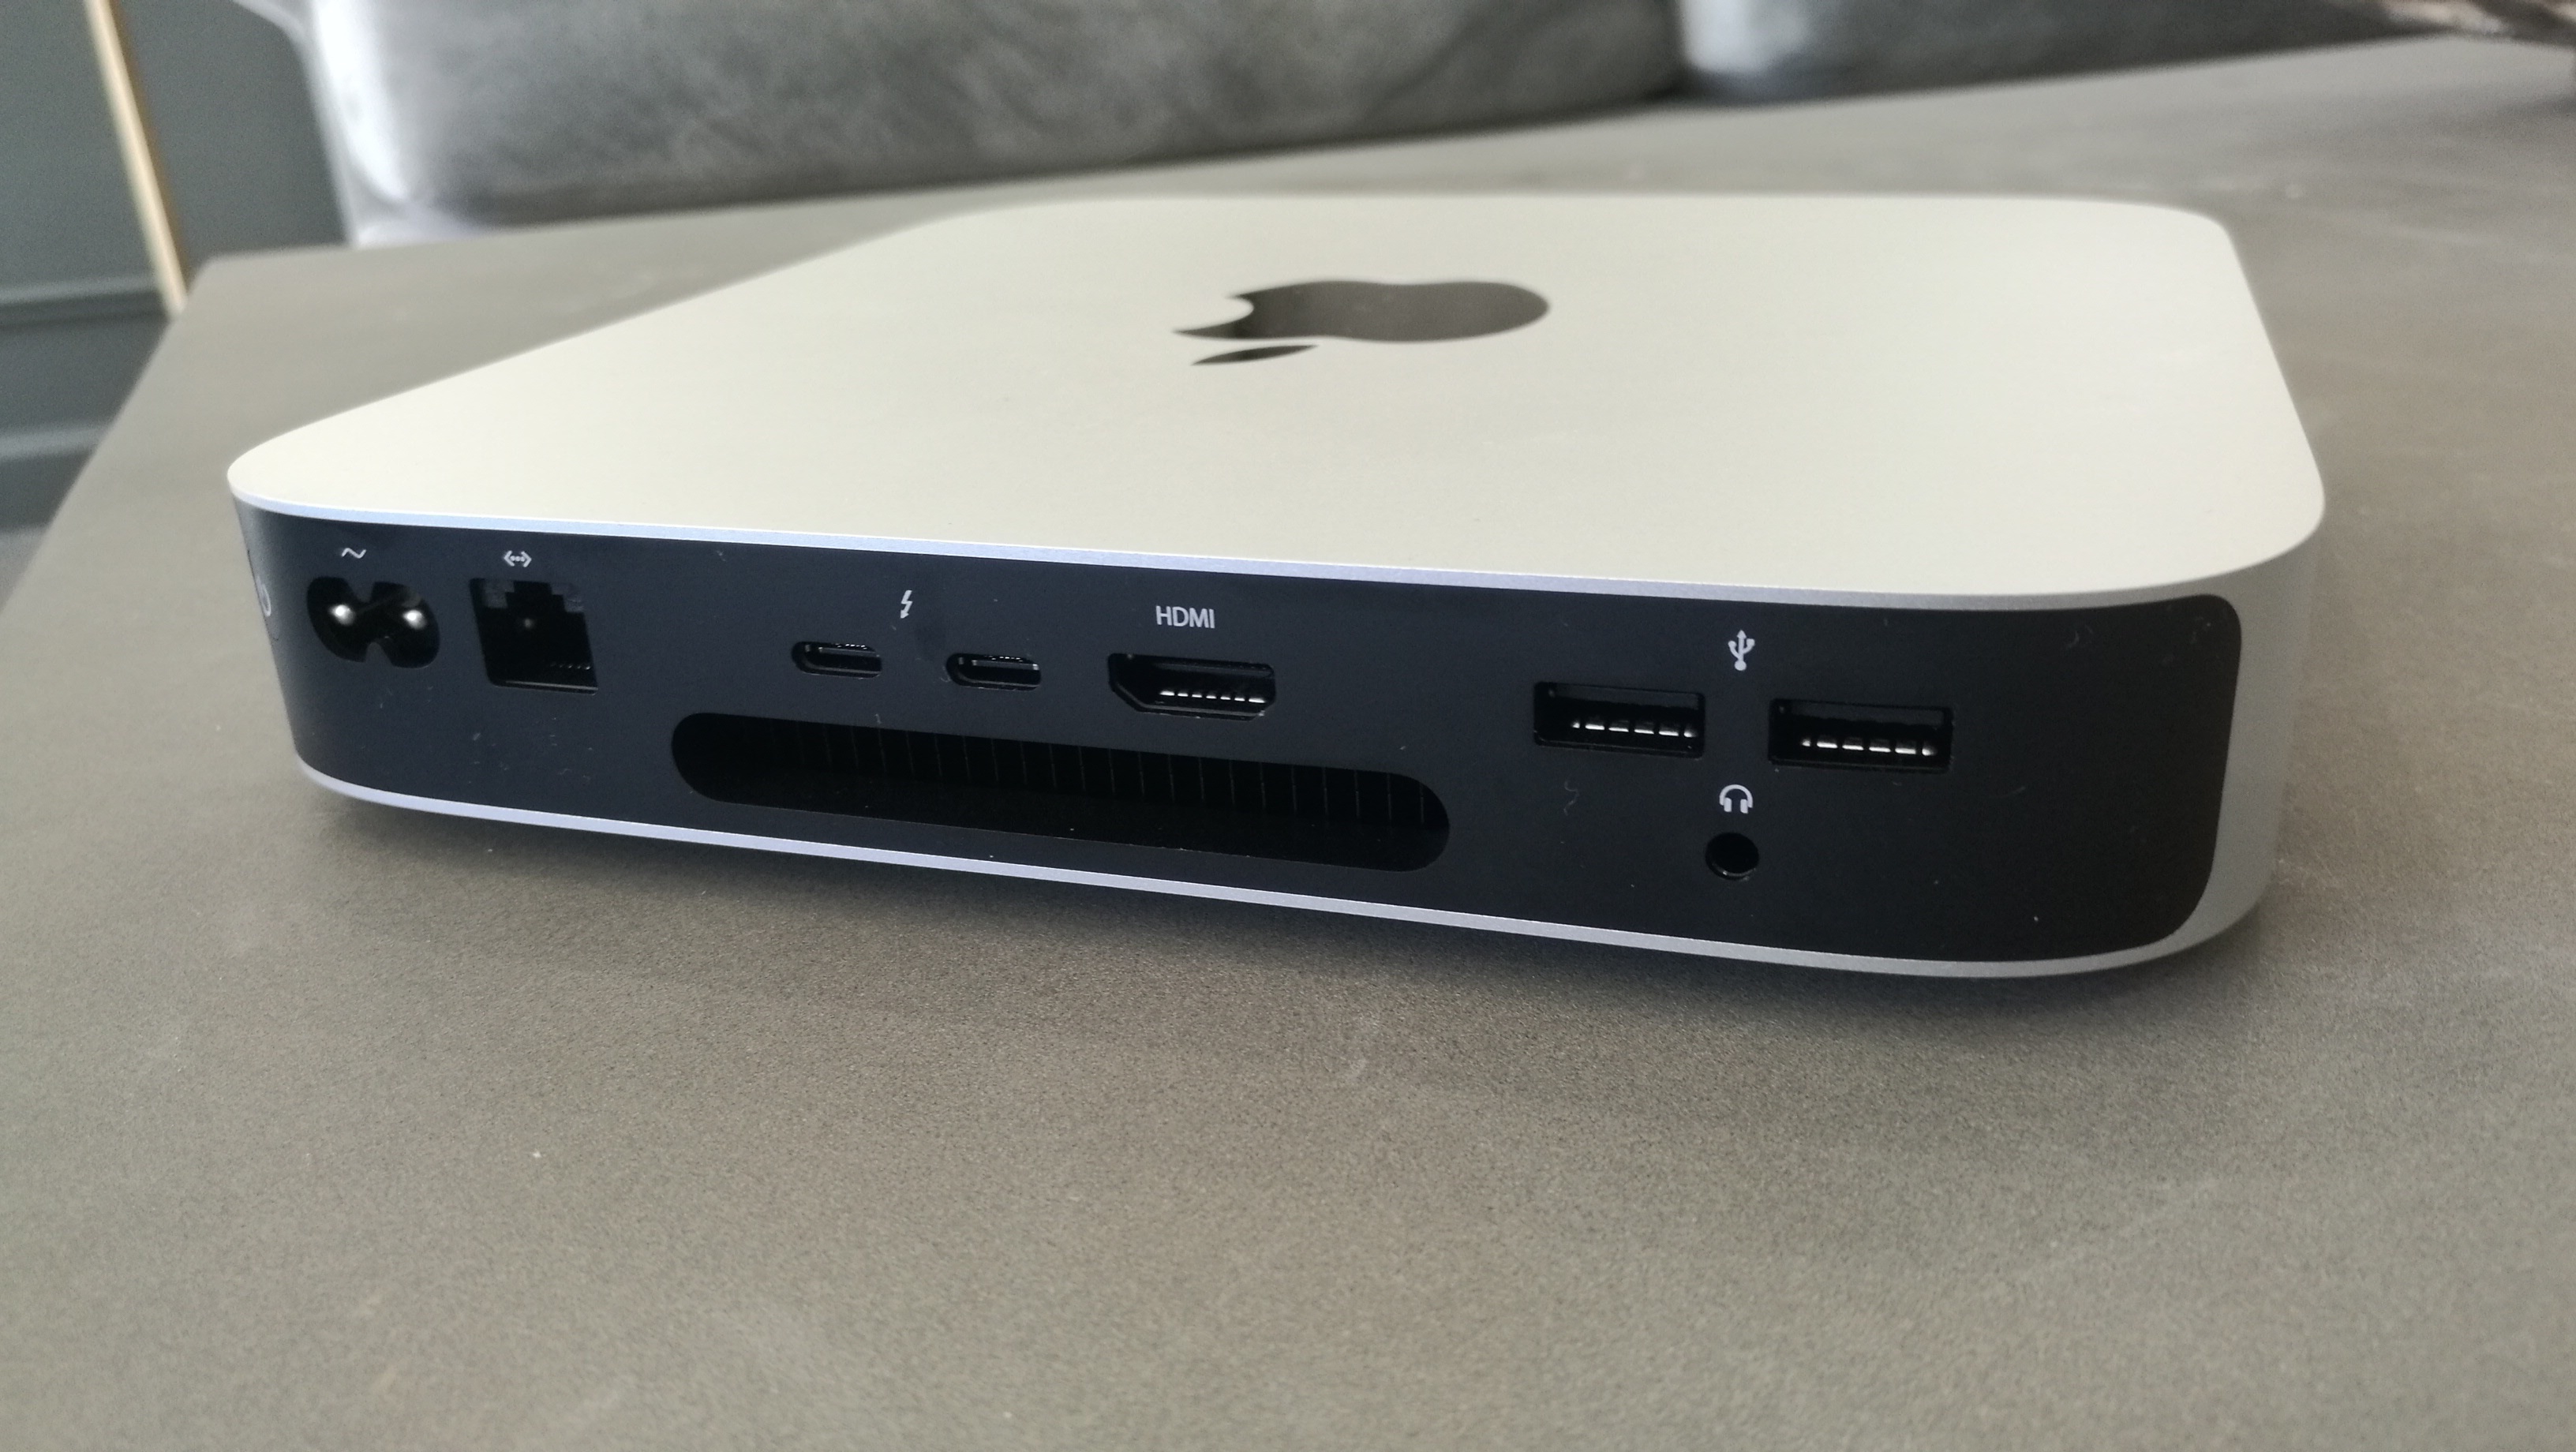 load games on a external ssd for mac mini